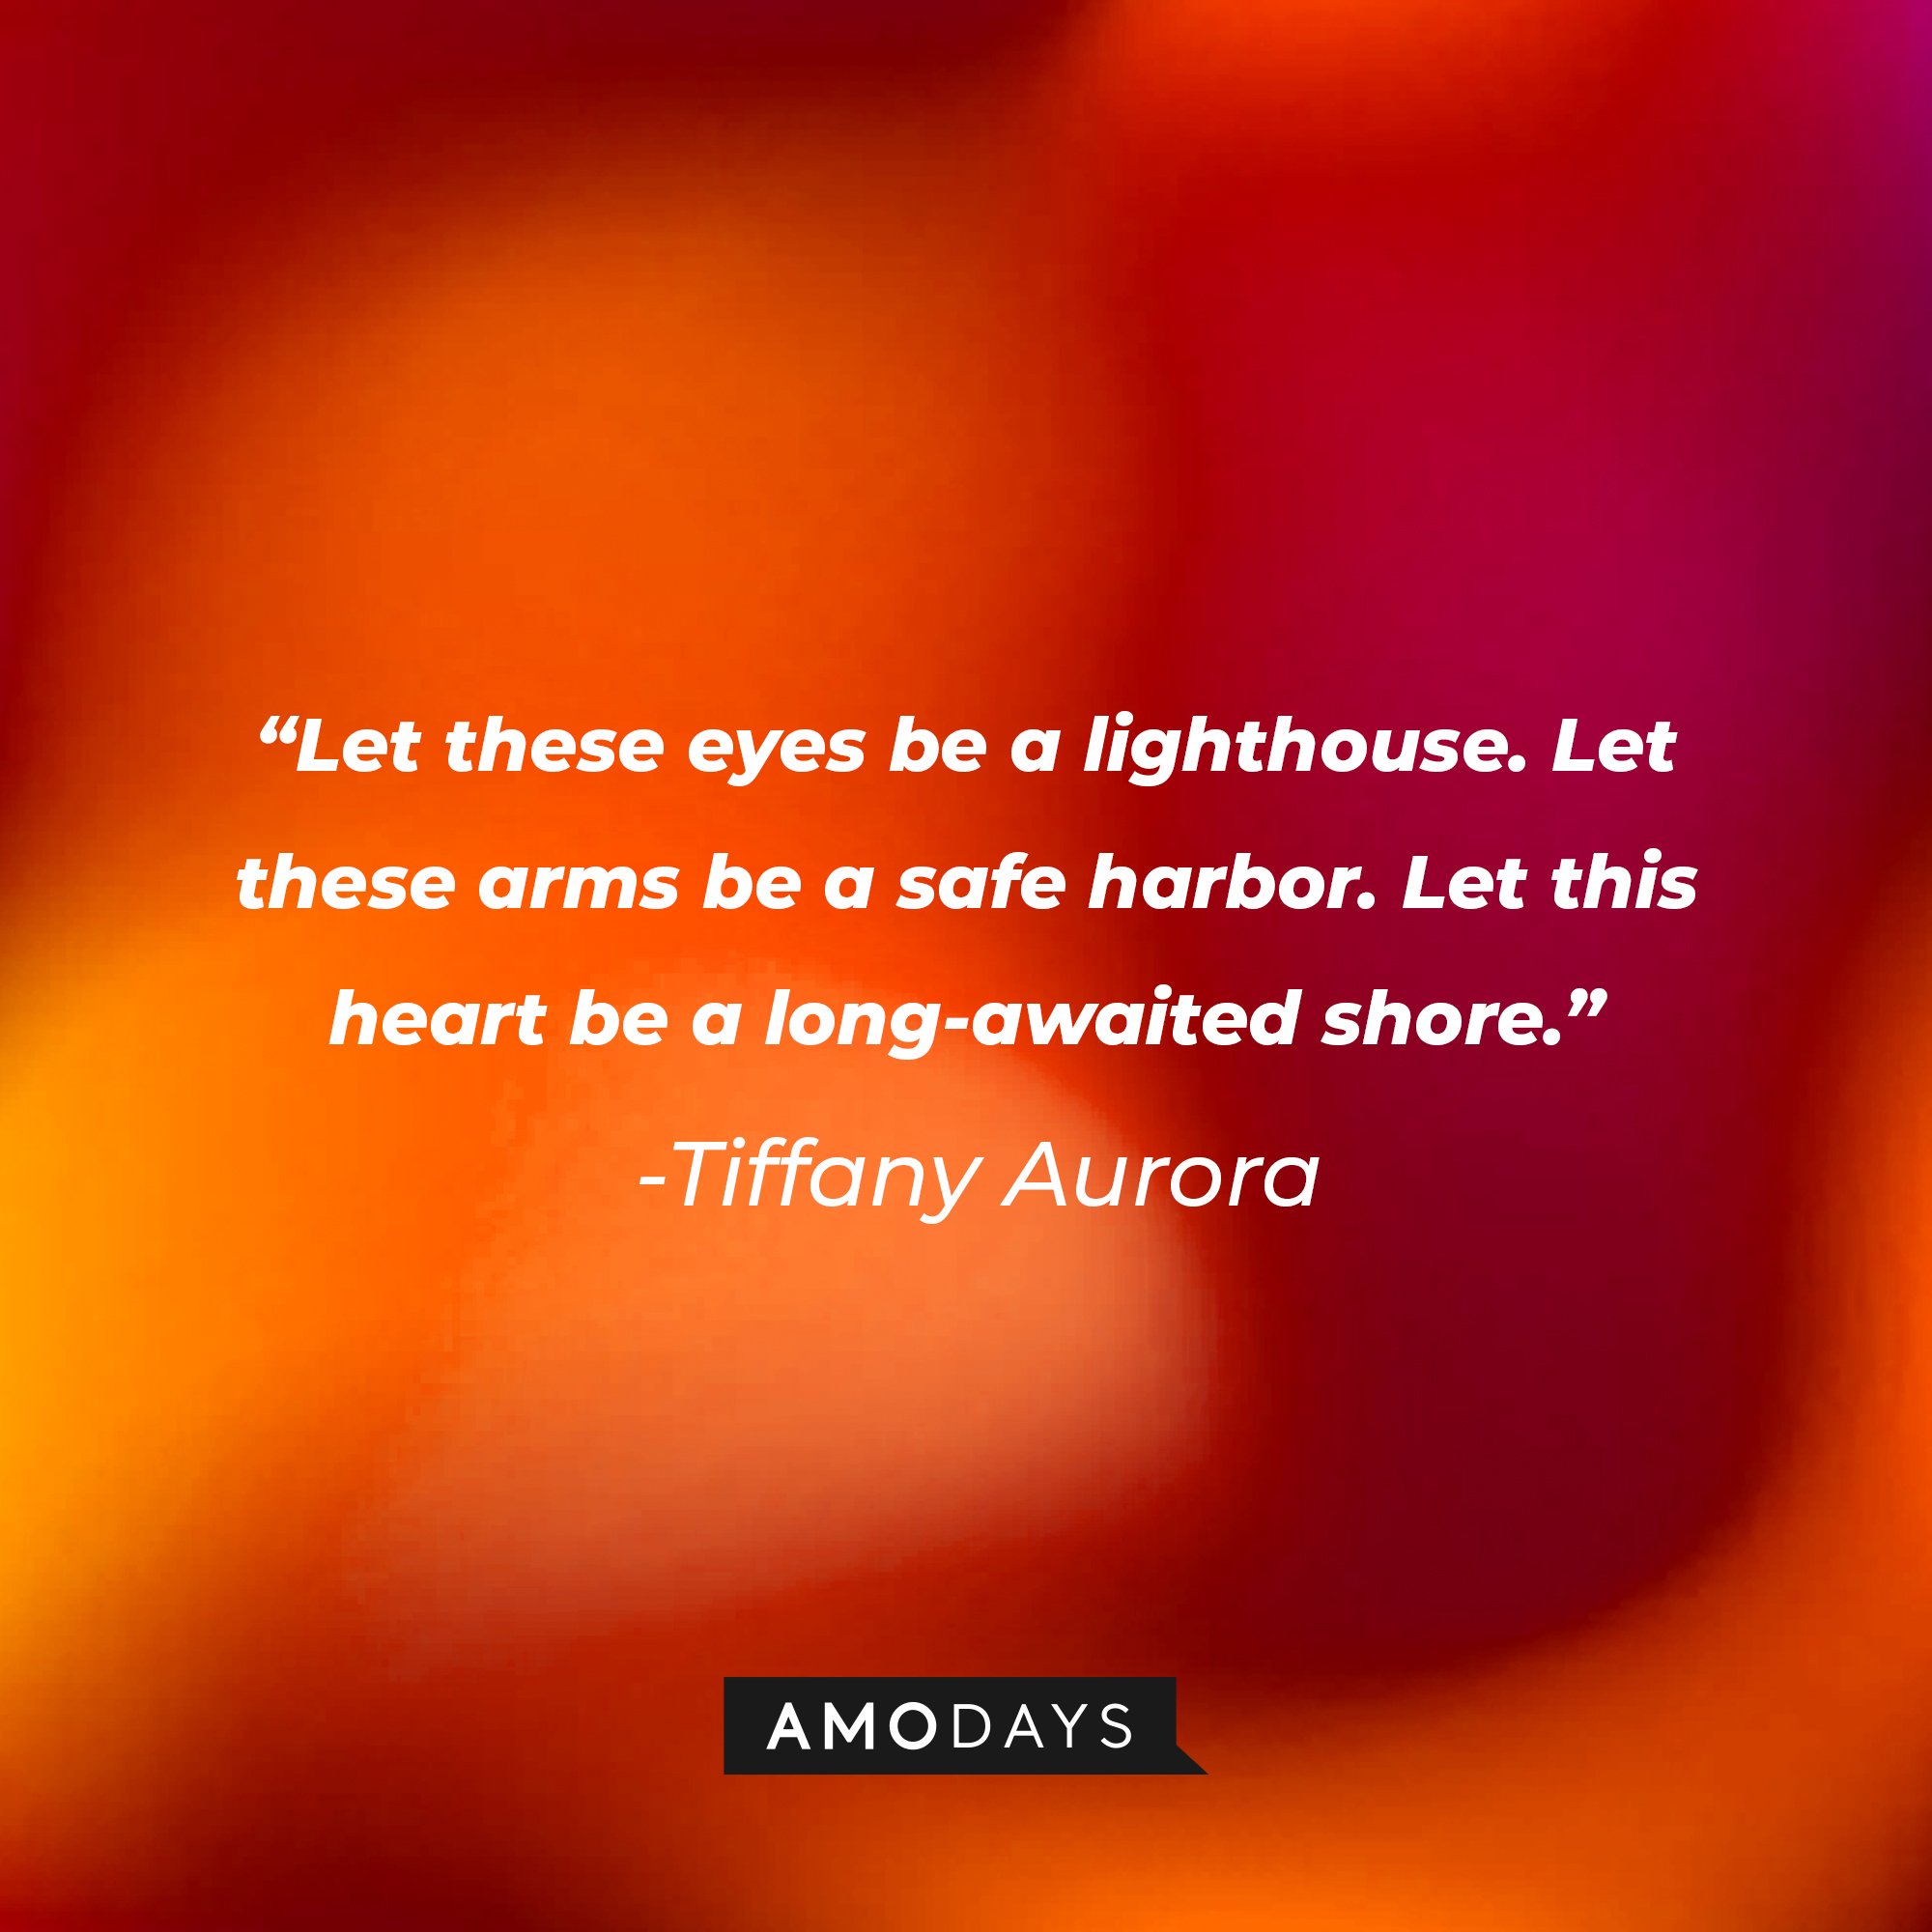 Tiffany Aurora’s quote: “Let these eyes be a lighthouse. Let these arms be a safe harbor. Let this heart be a long-awaited shore.” | Image: AmoDays  